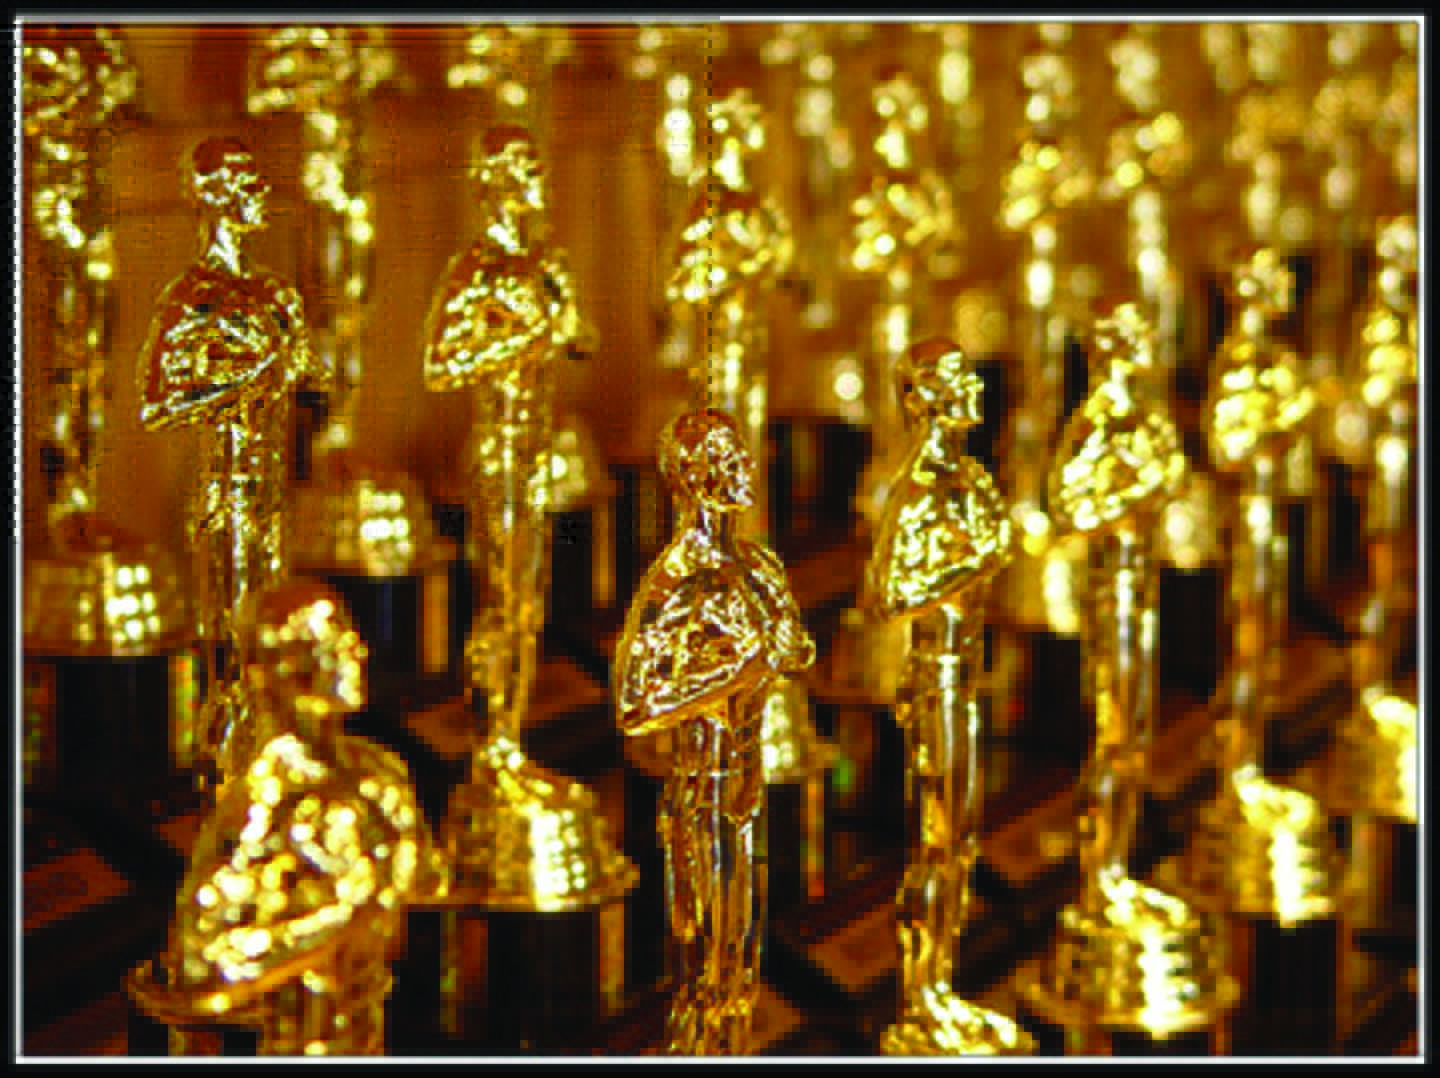 Geek insider, geekinsider, geekinsider. Com,, the 2014 oscar nominations are in! , entertainment